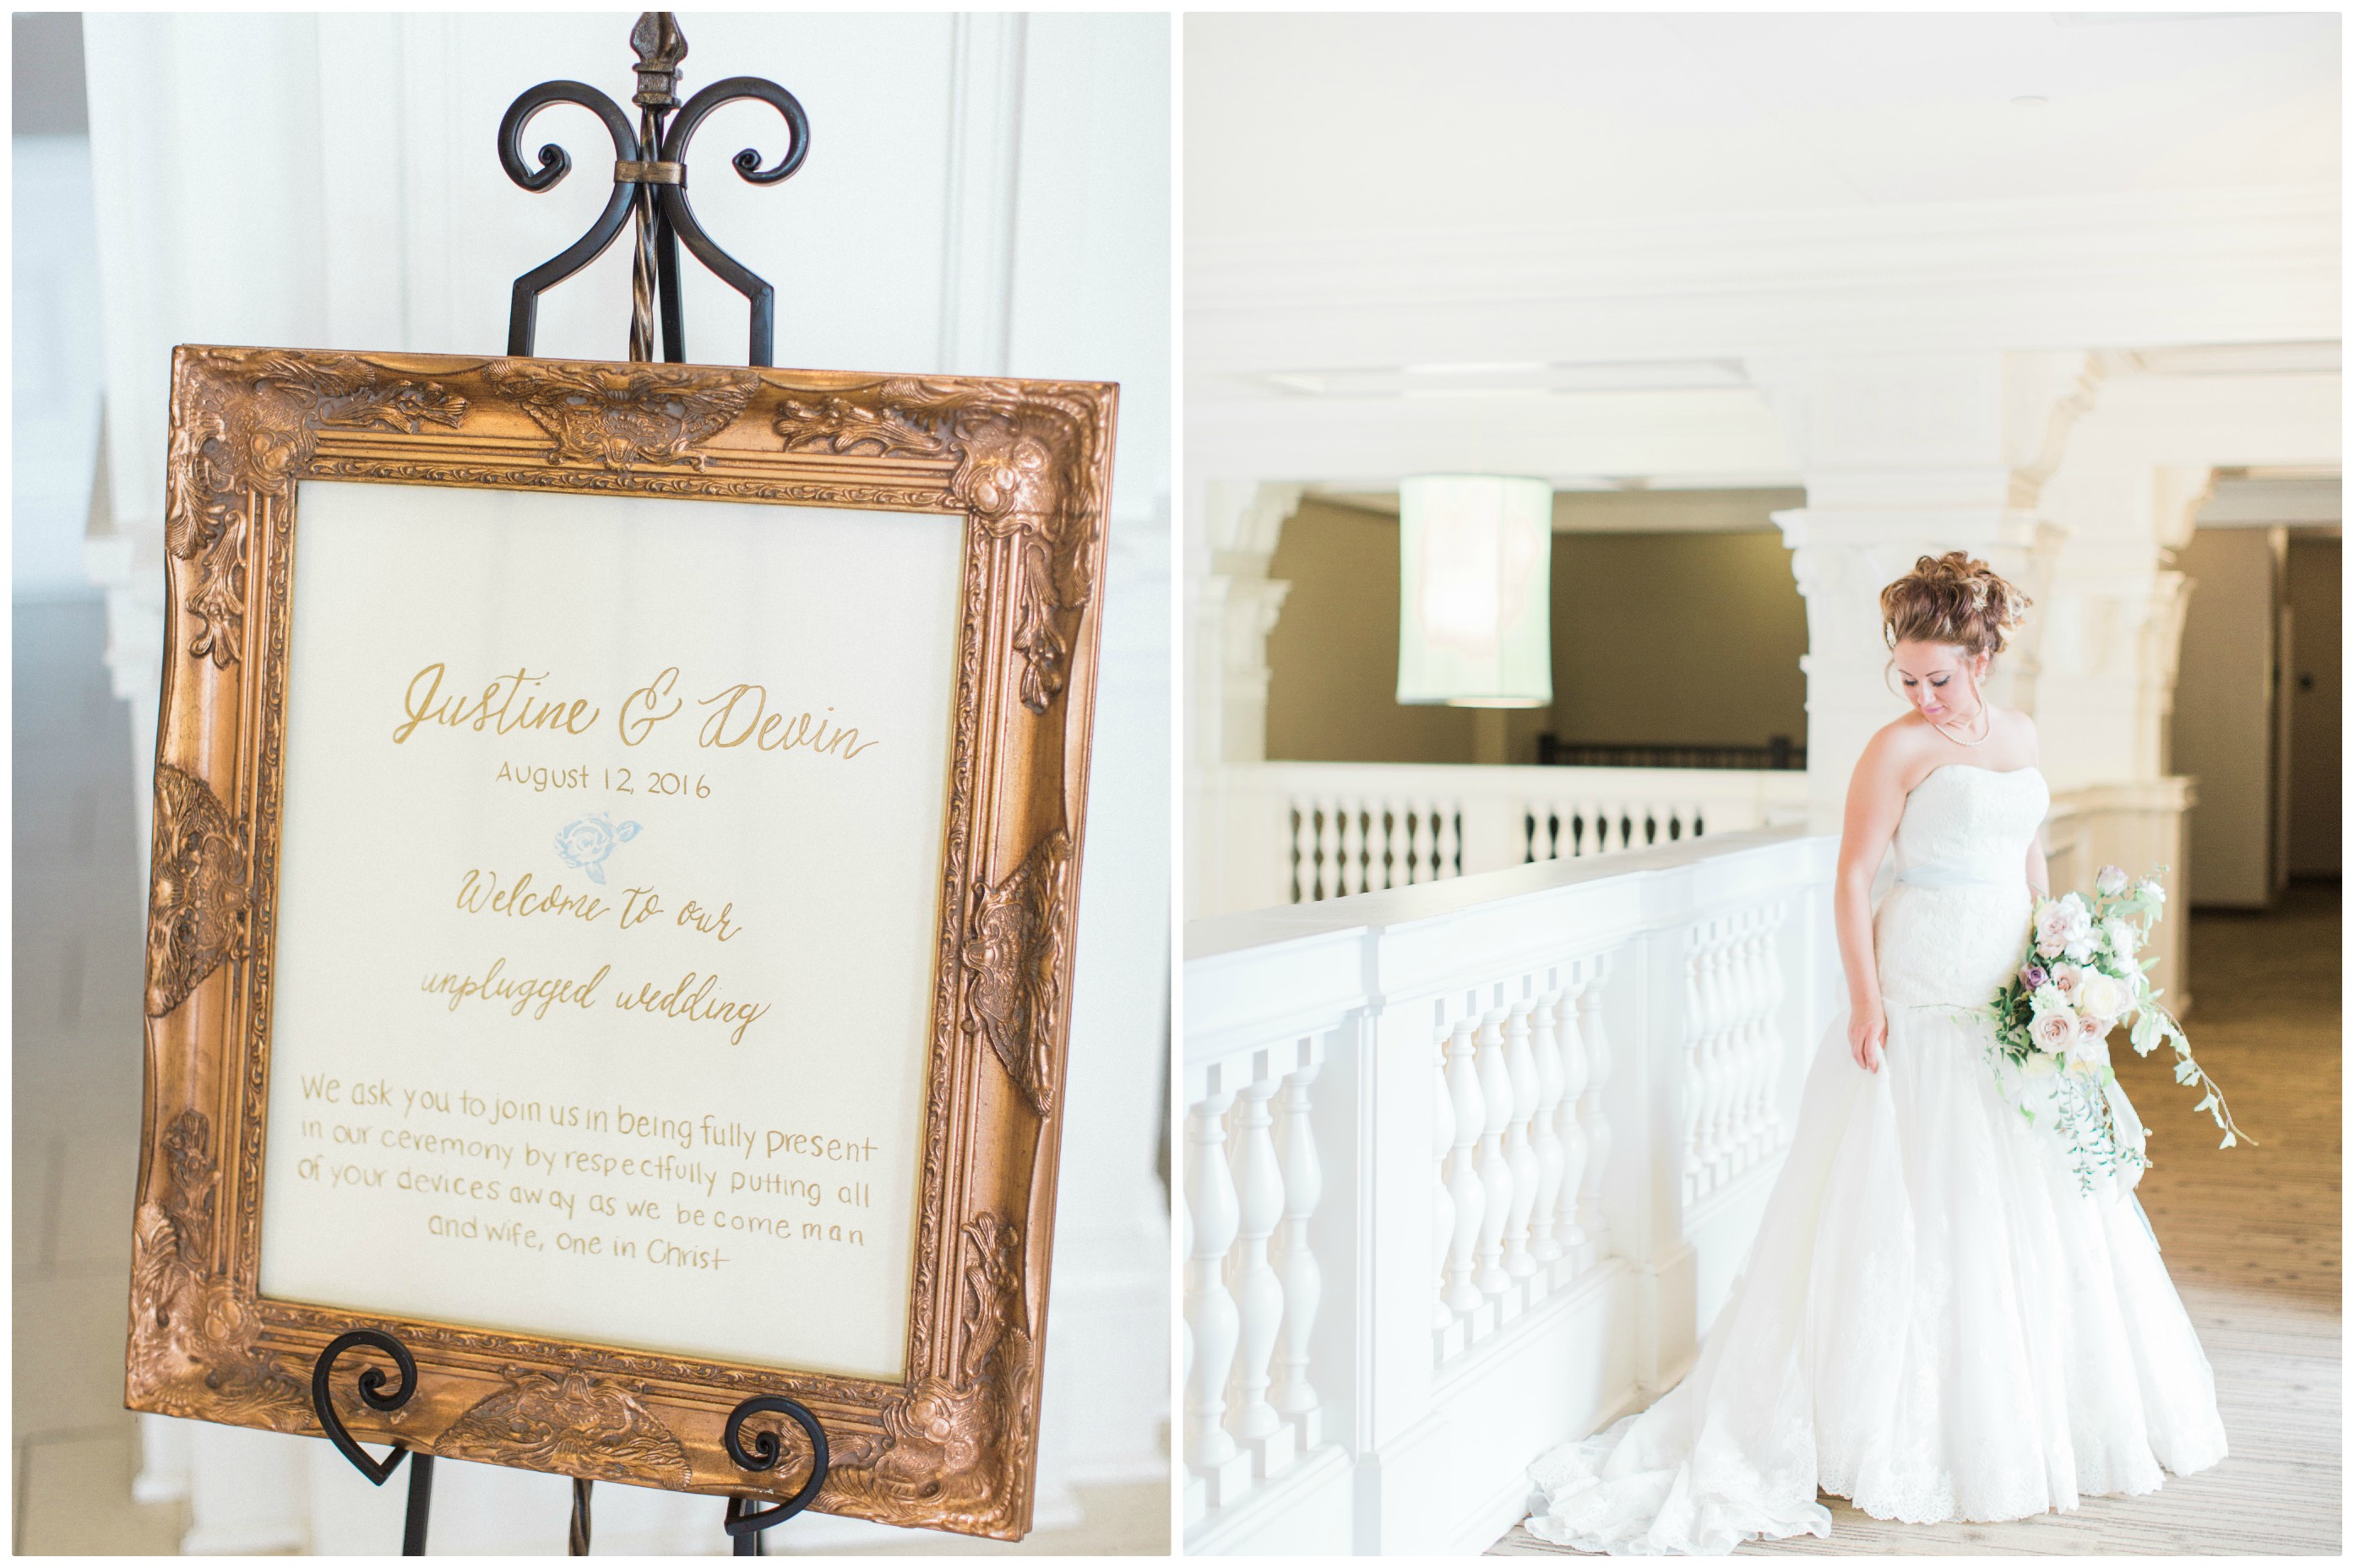 Historic Wedding Venues | The Day's Design | Samantha James Photography